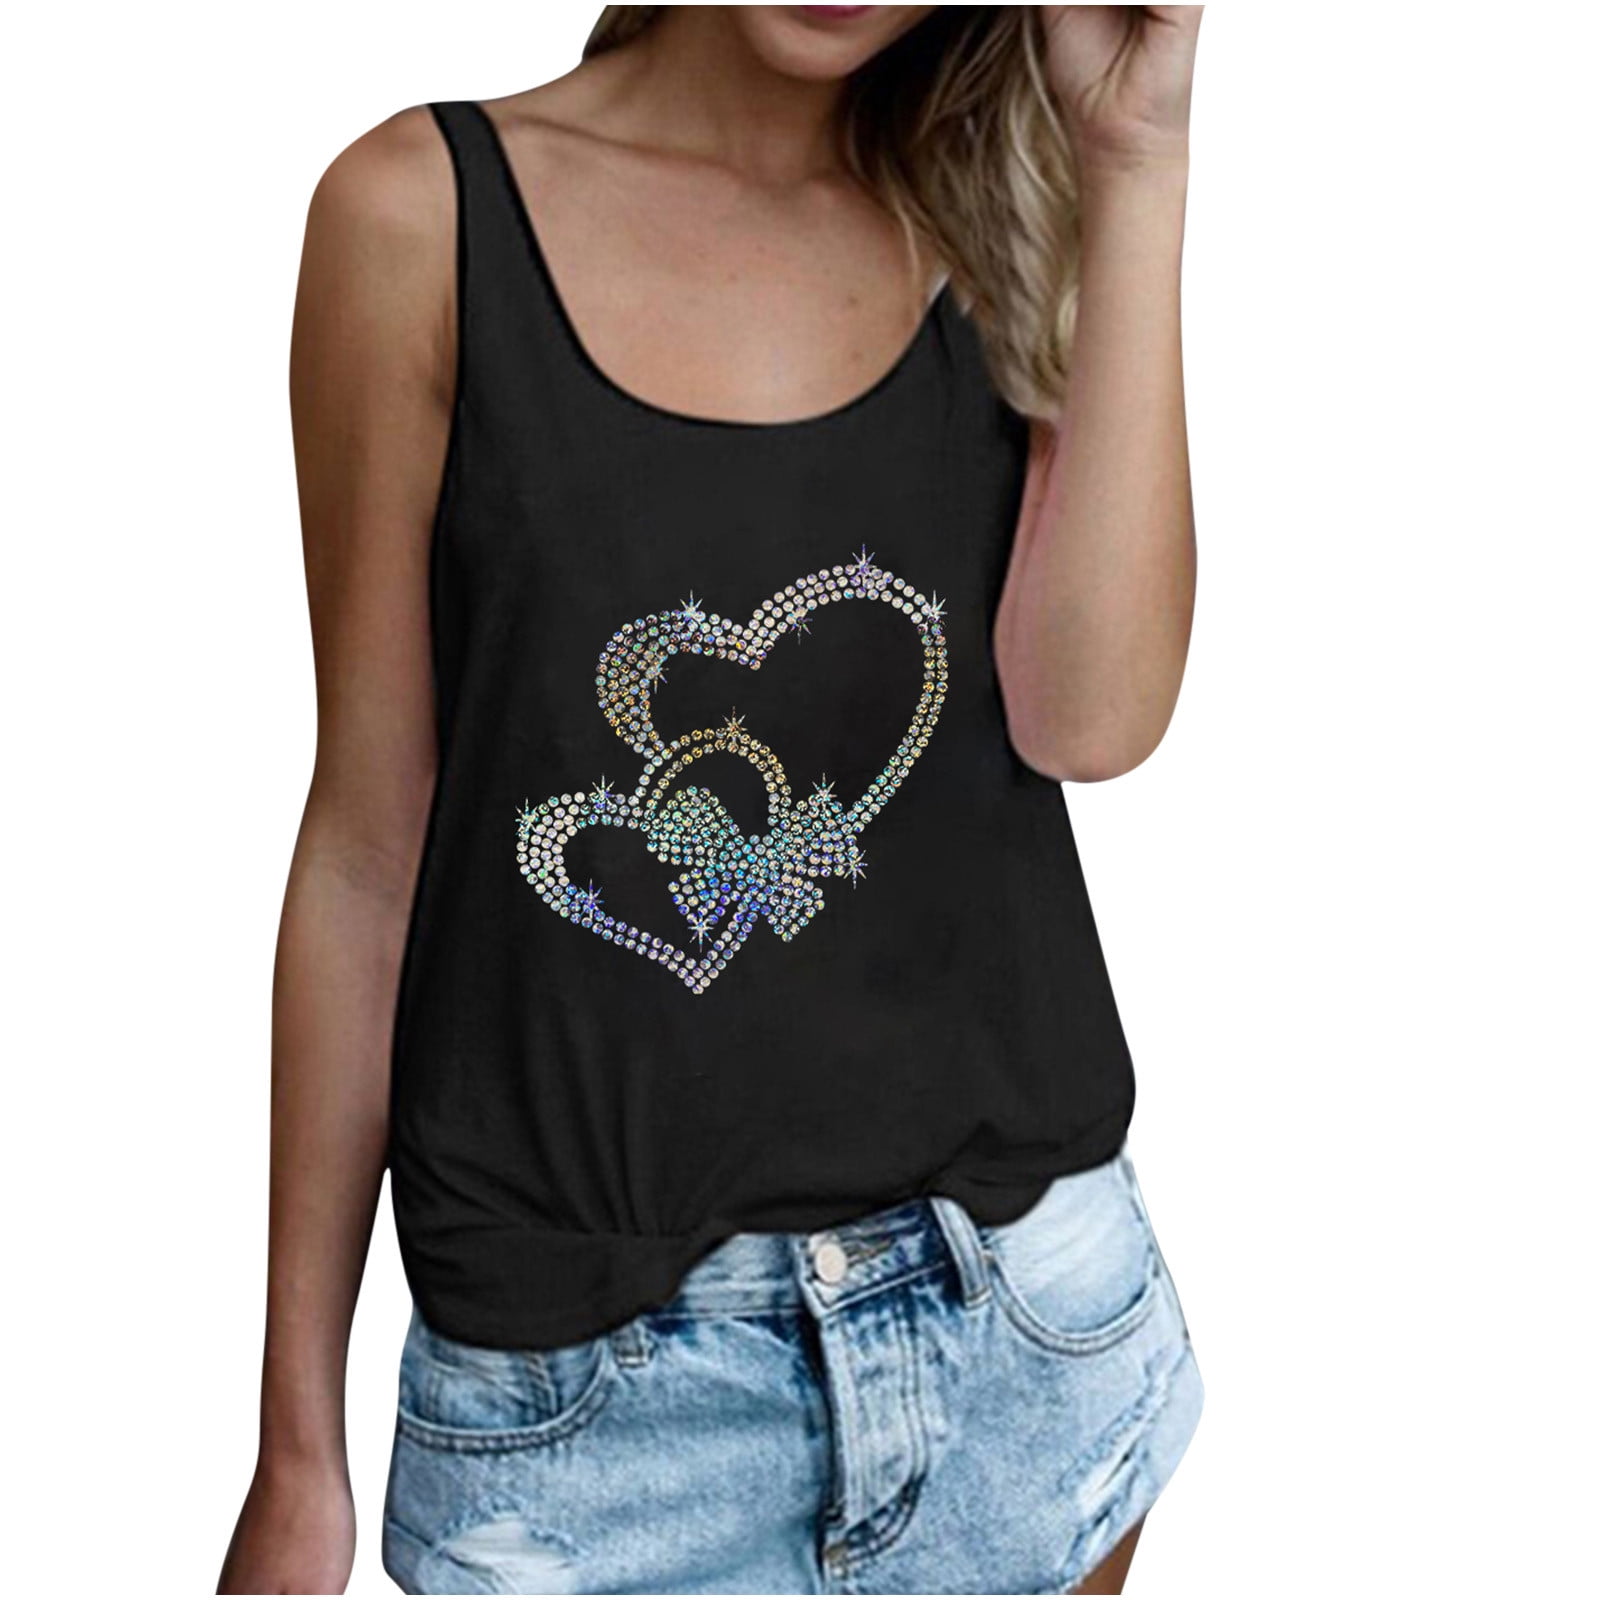 YWDJ Graphic Tees for Women Vintage 80s Fashion Casual Solid Color Round  Neck Colorful Sequin Printed Vest Top Black XL 